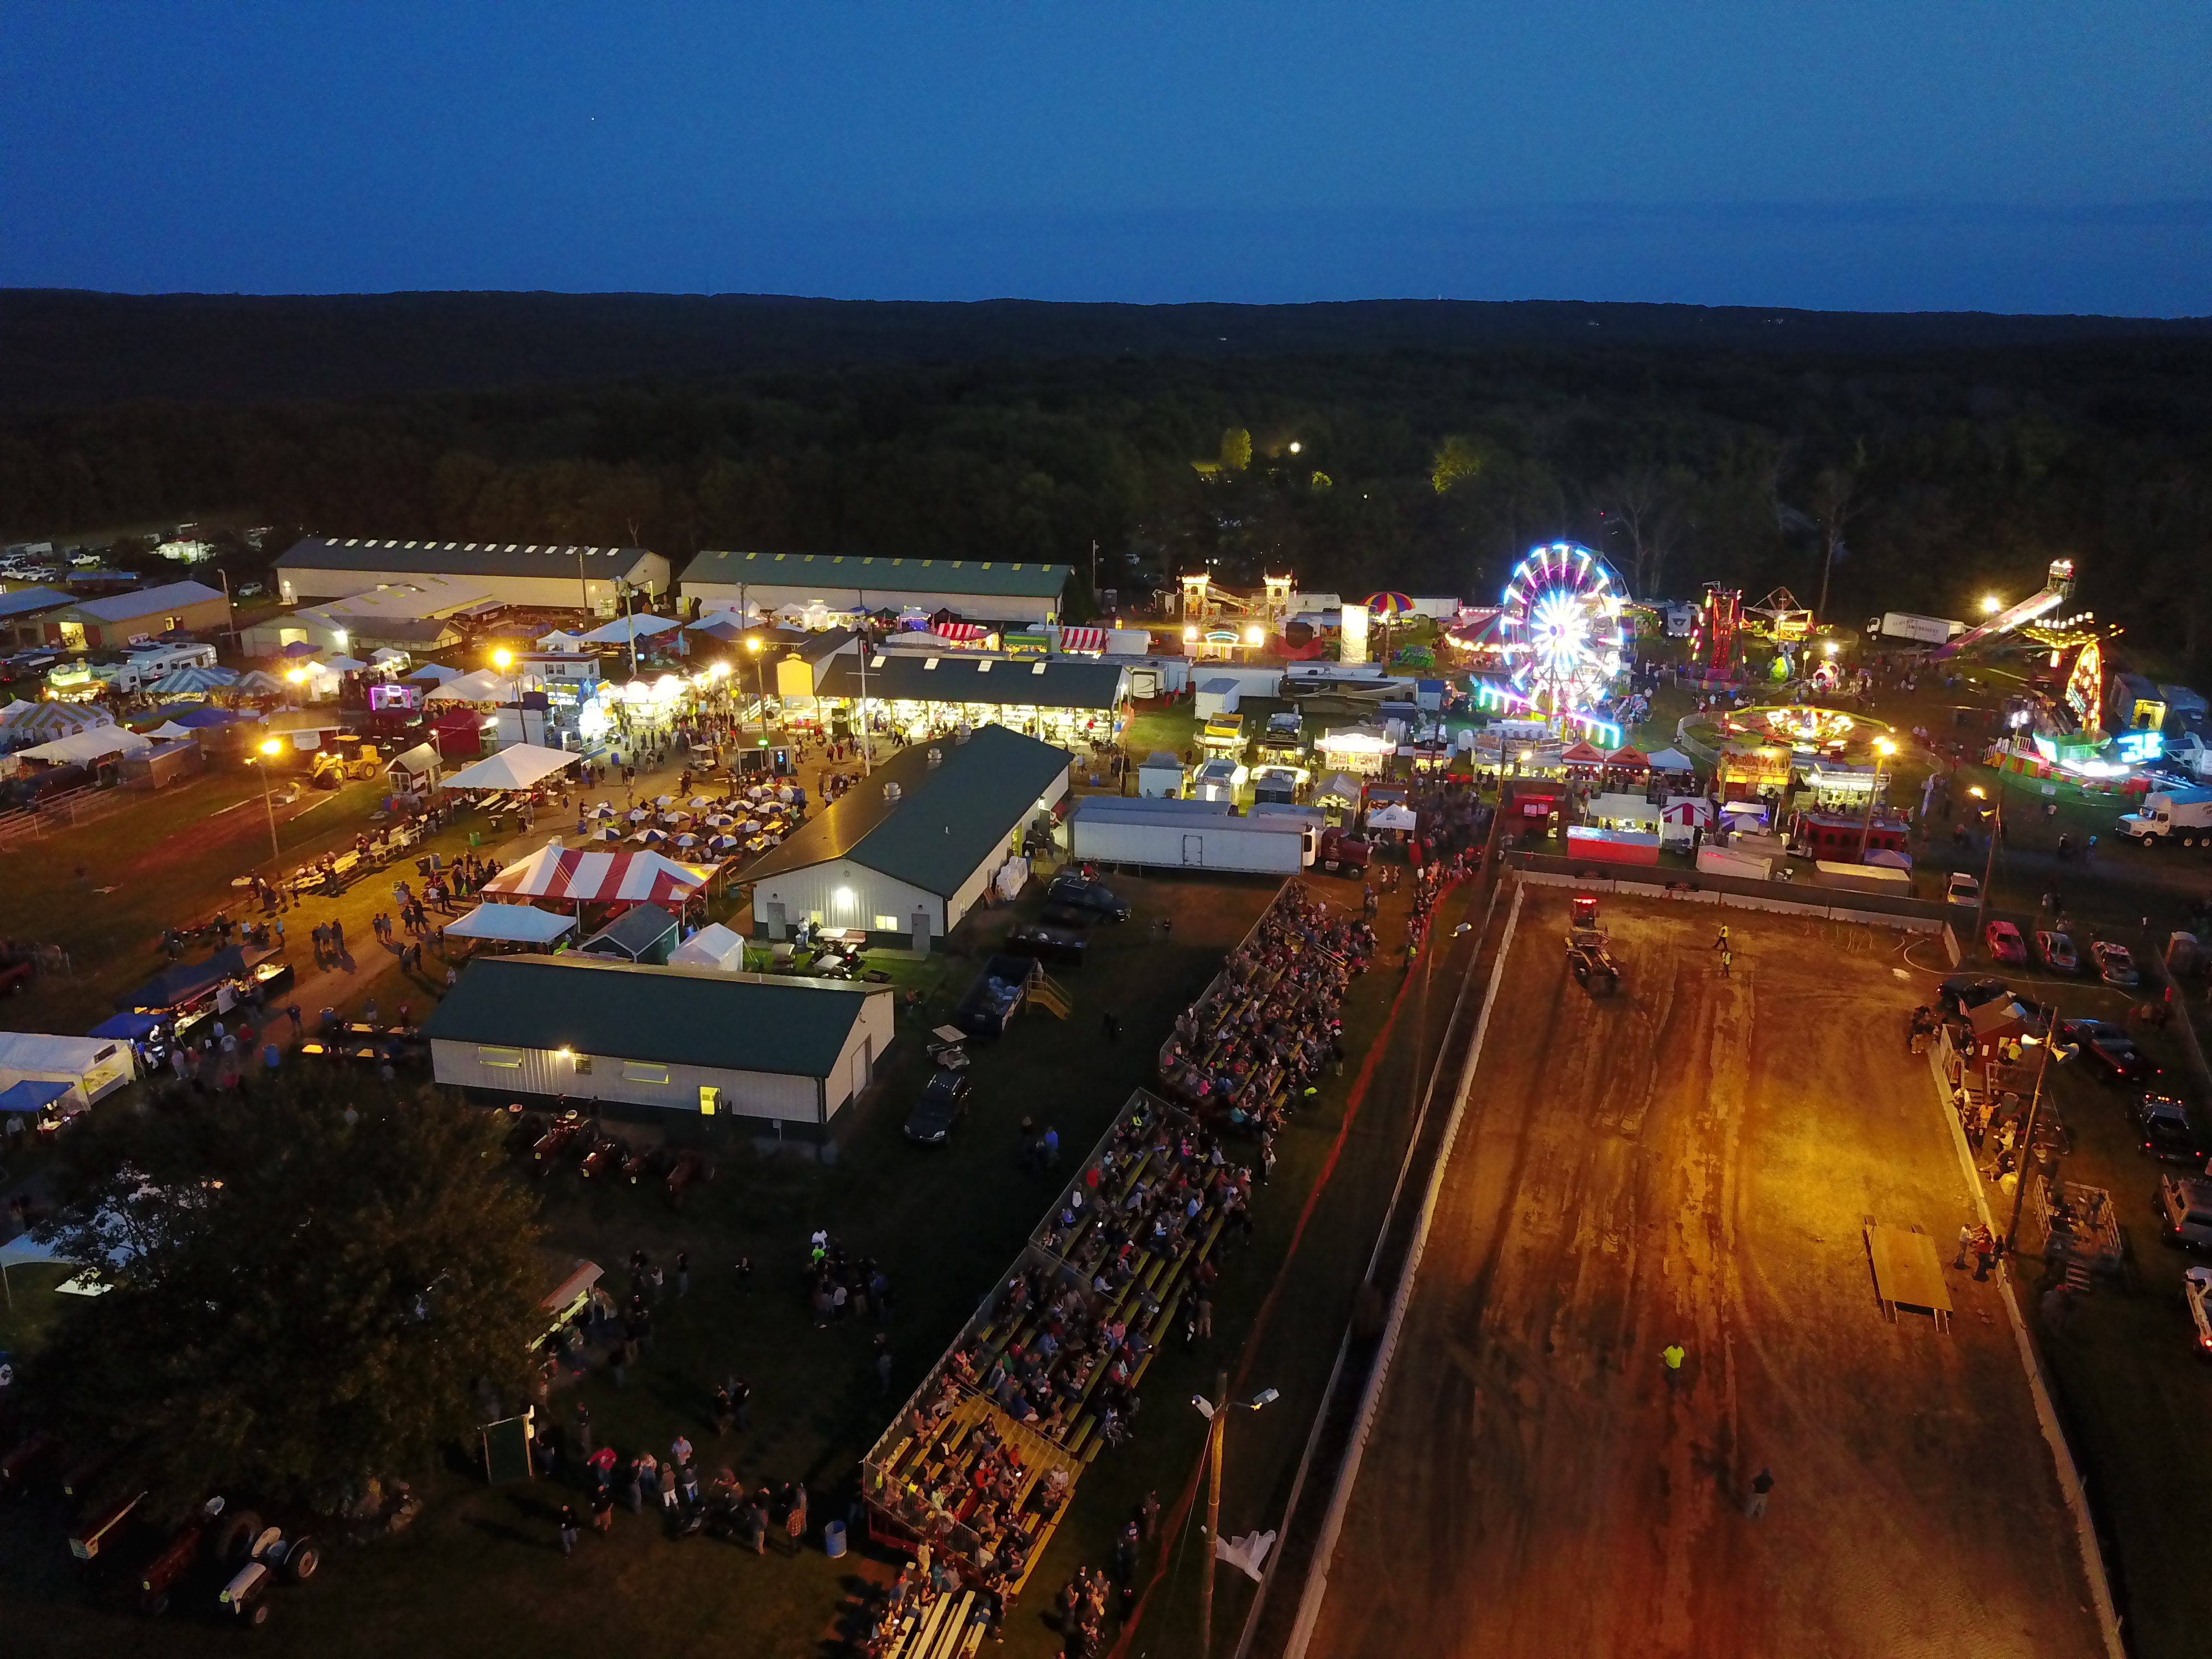 71st Annual Terryville Lions Country Fair Visit CT